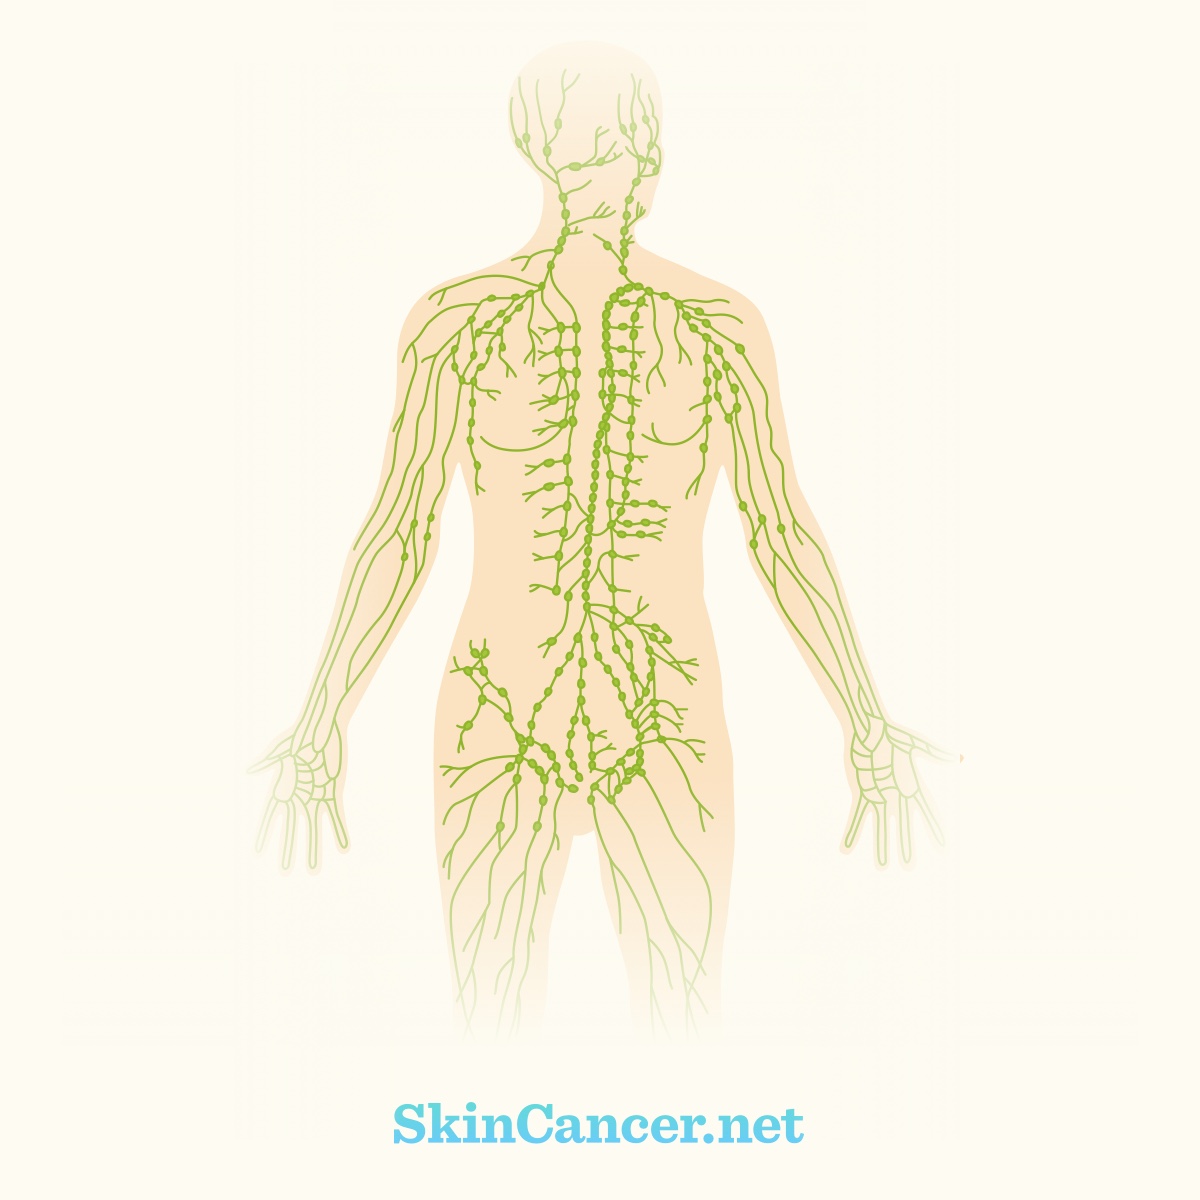 The outline of a body is laced with green lymph nodes and vessels